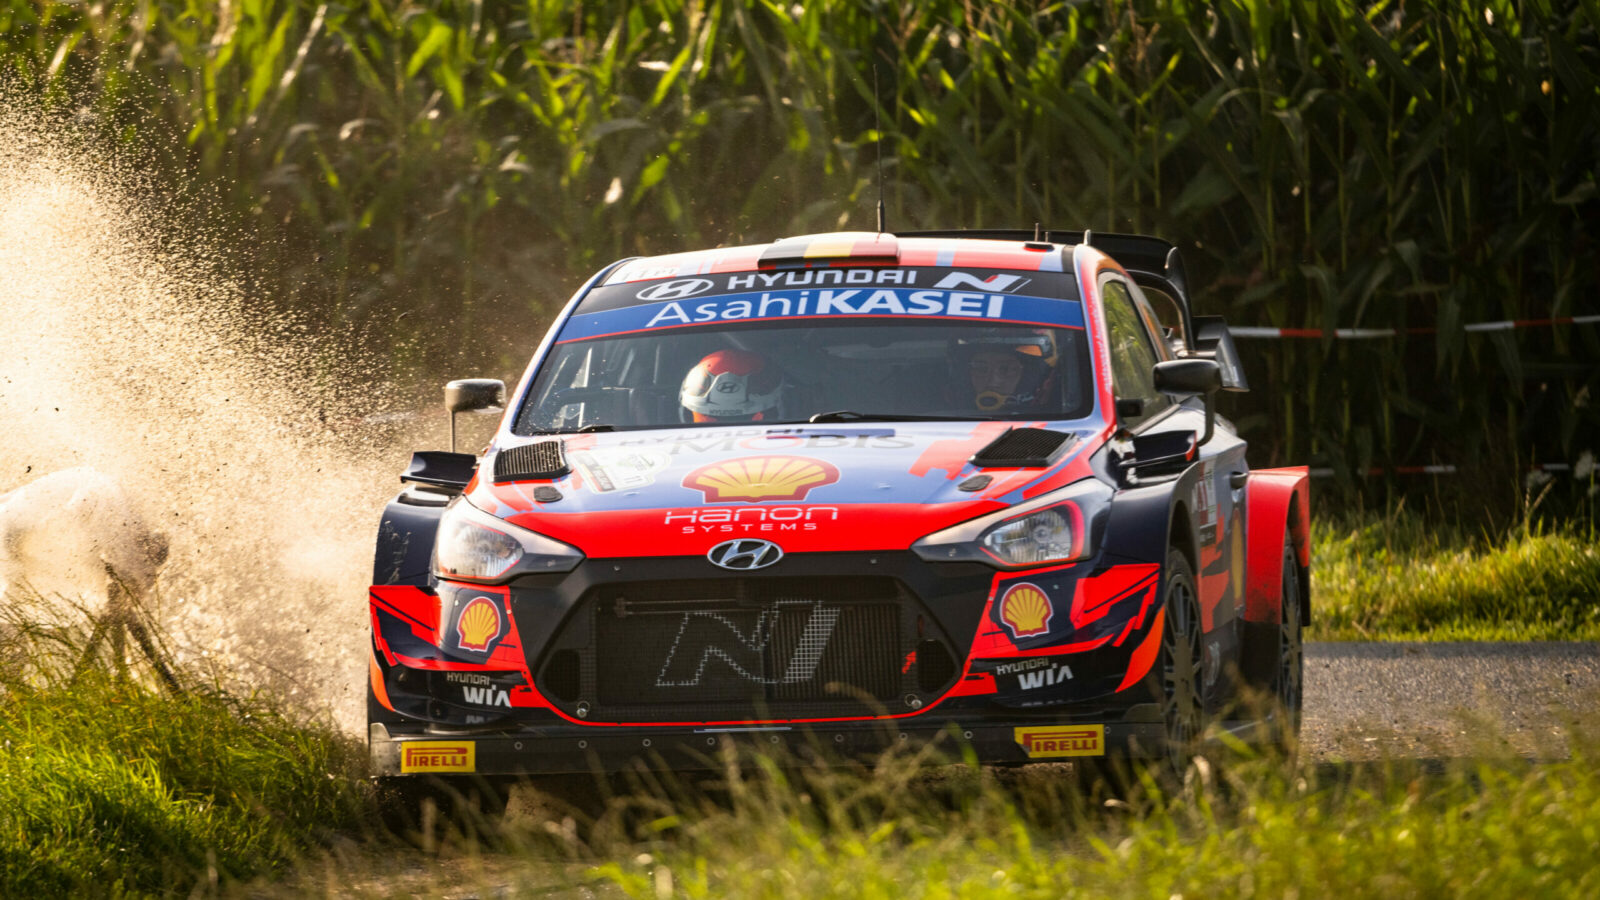 Thierry Neuville leads after first day in Belgium